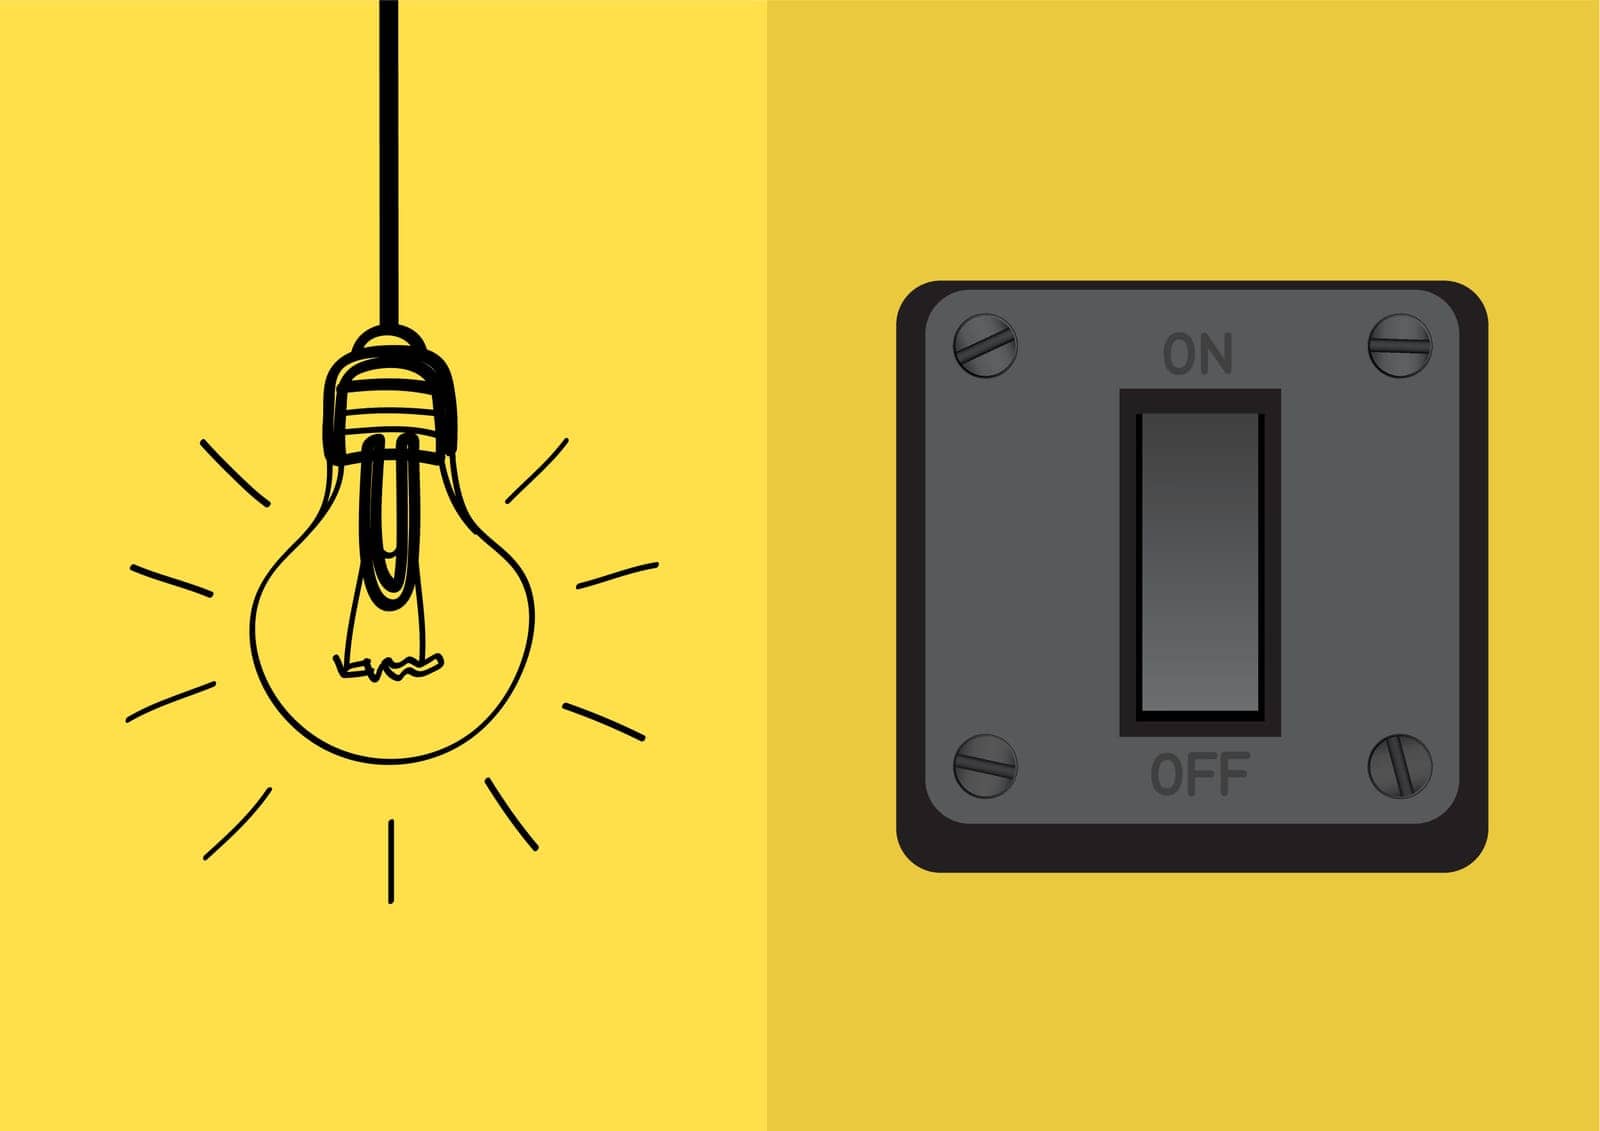 Switch lamp light on yellow background. Hanging on and off idea solution with light bulb